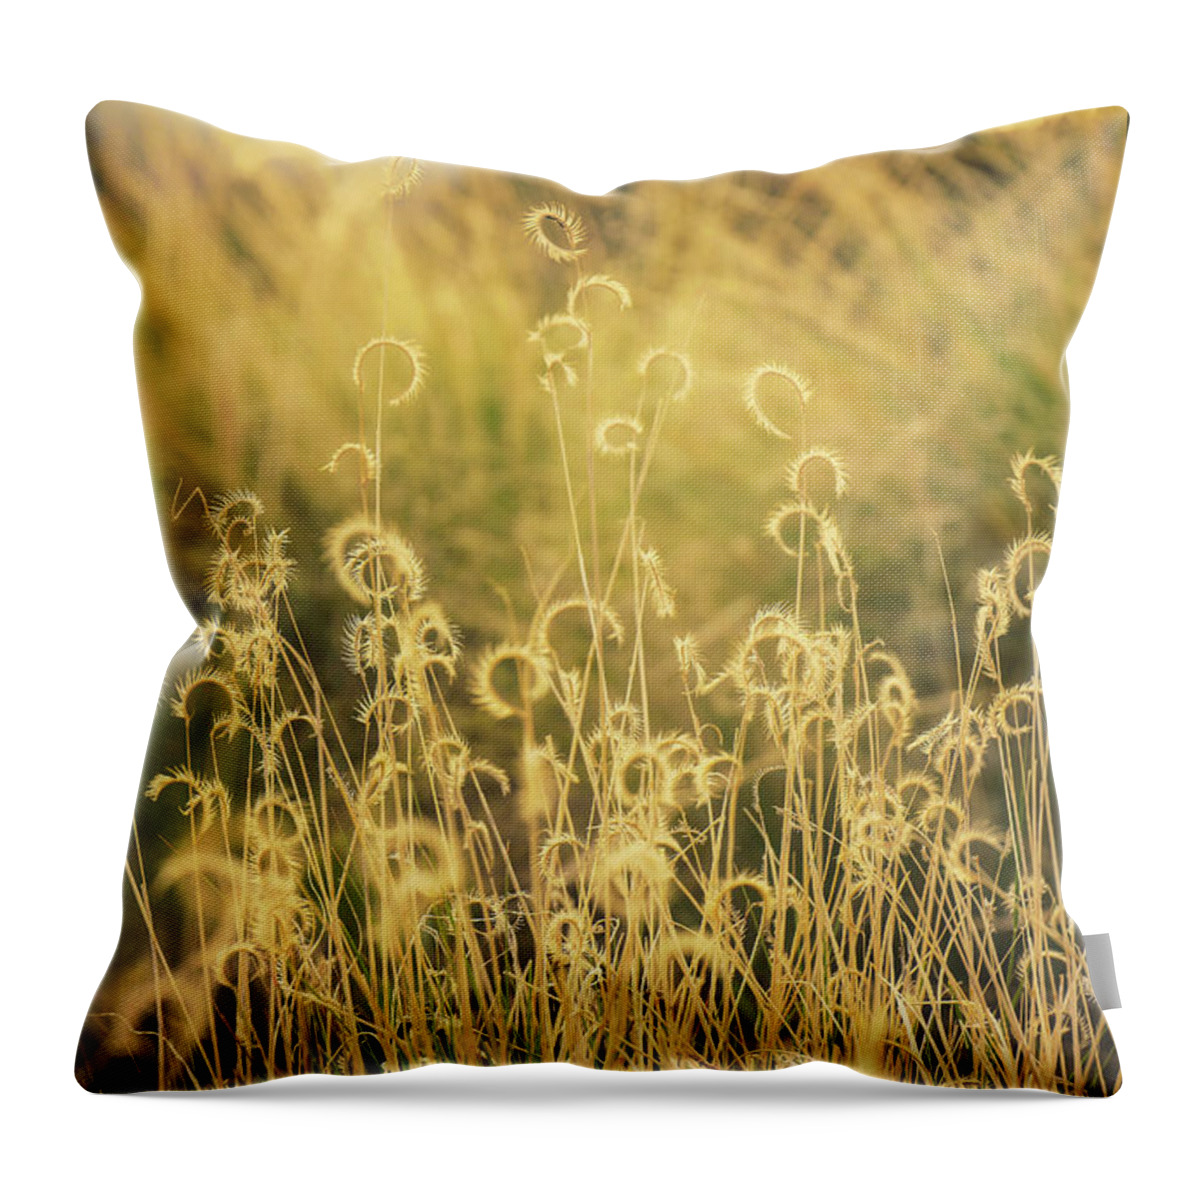 Mountain Throw Pillow featuring the photograph Sun Swirls by Go and Flow Photos